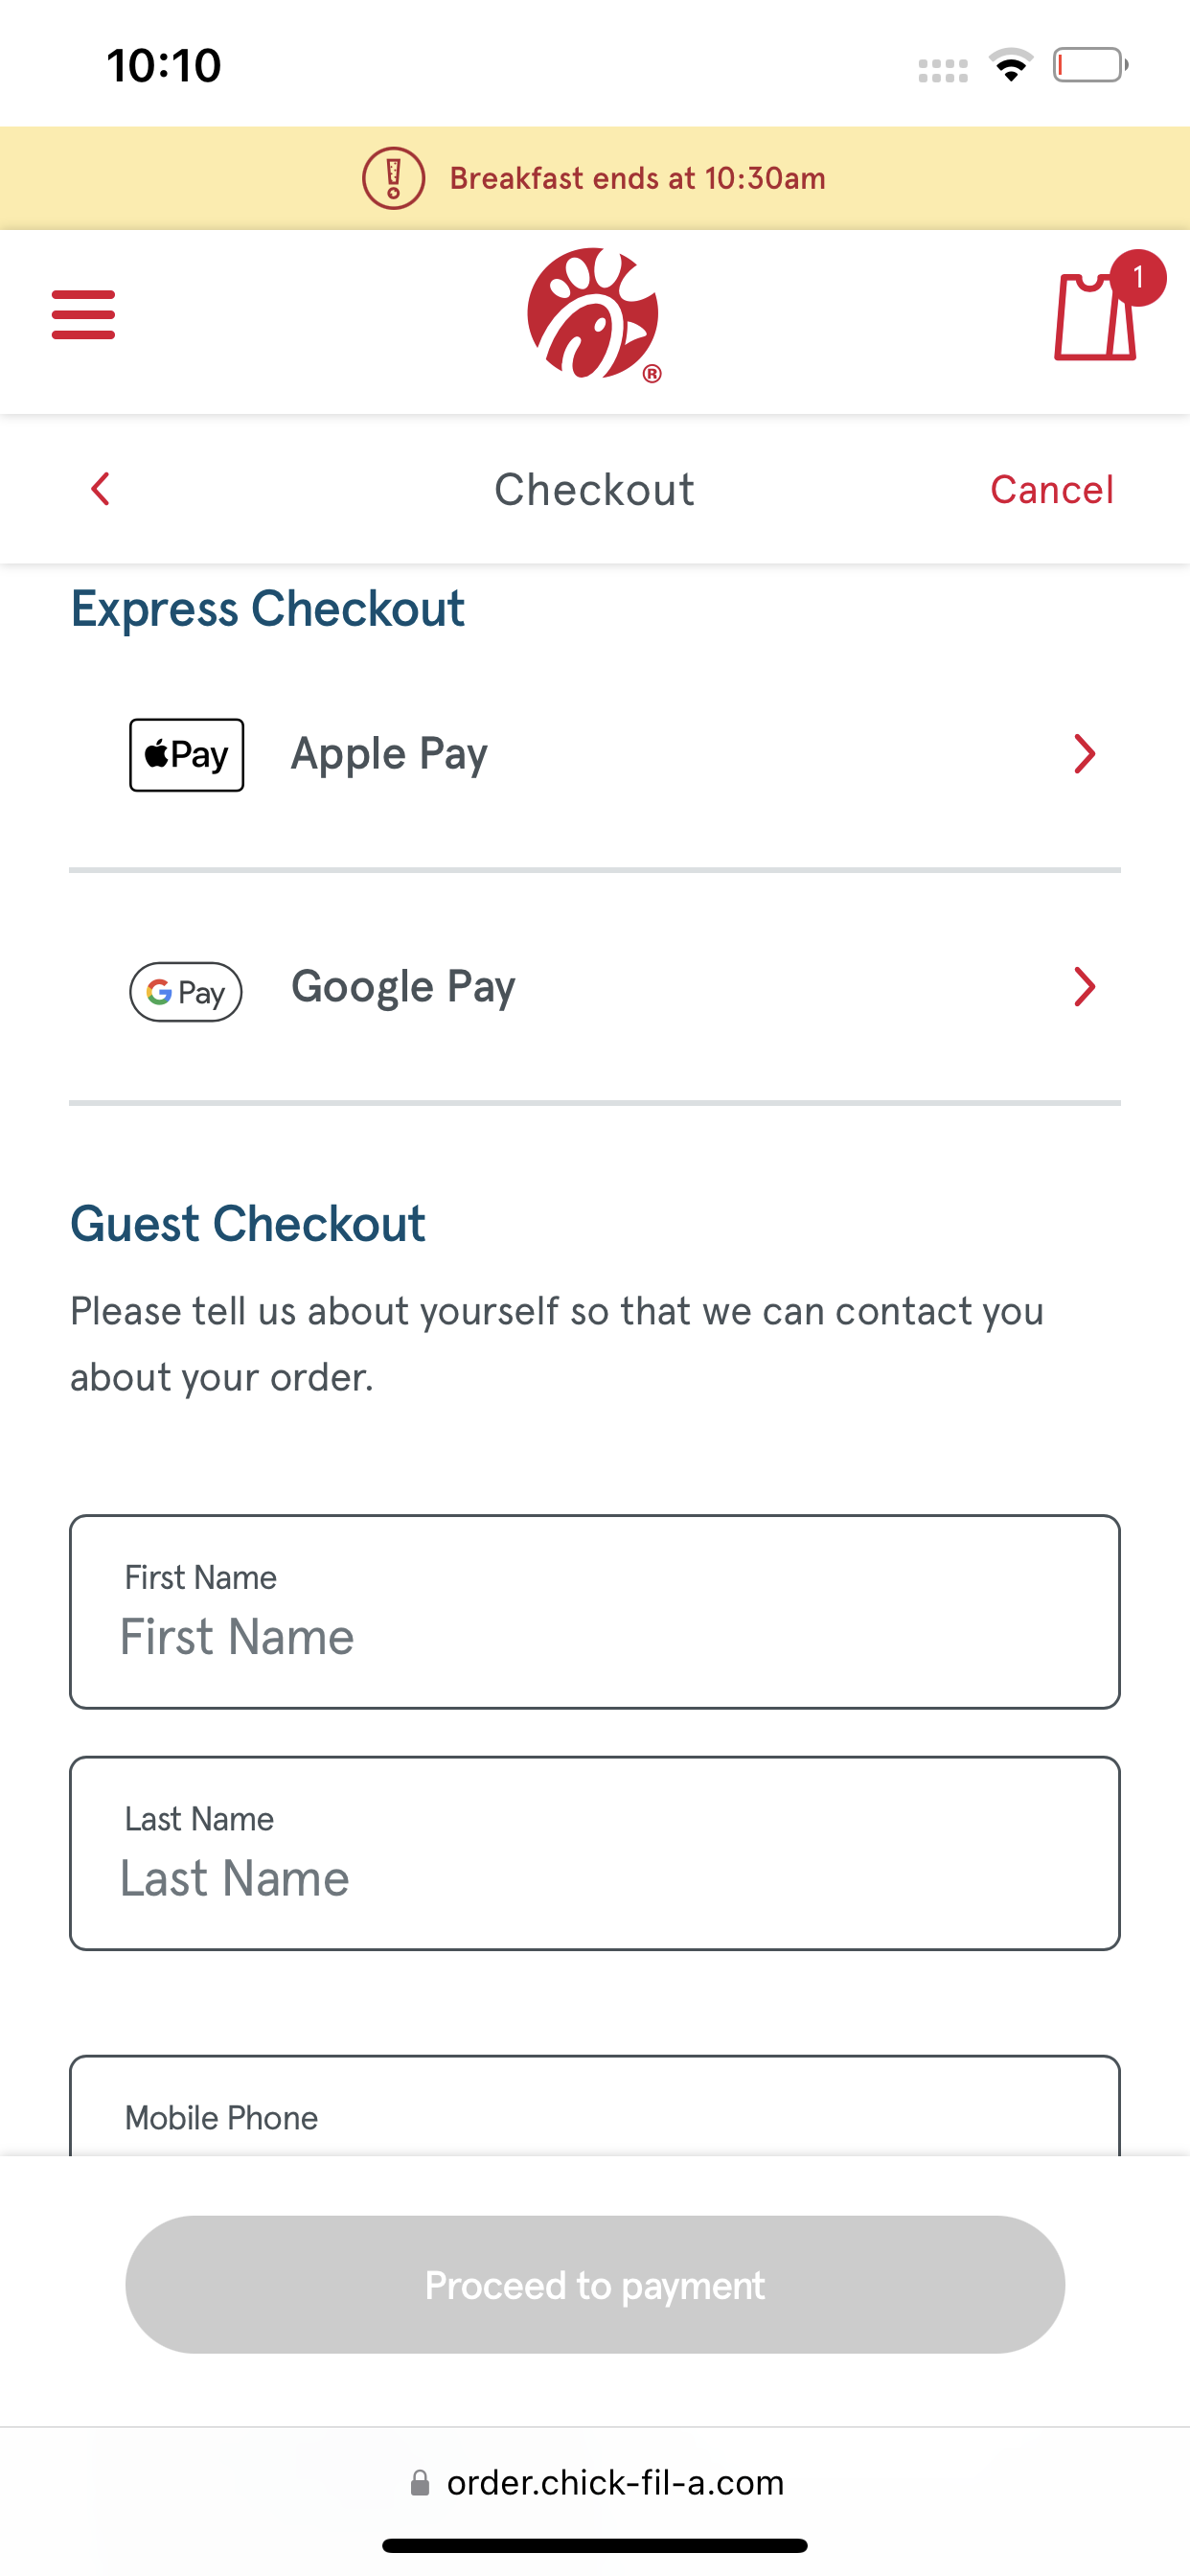 Chick-fil-A accepts Google Pay & Apple Pay online.